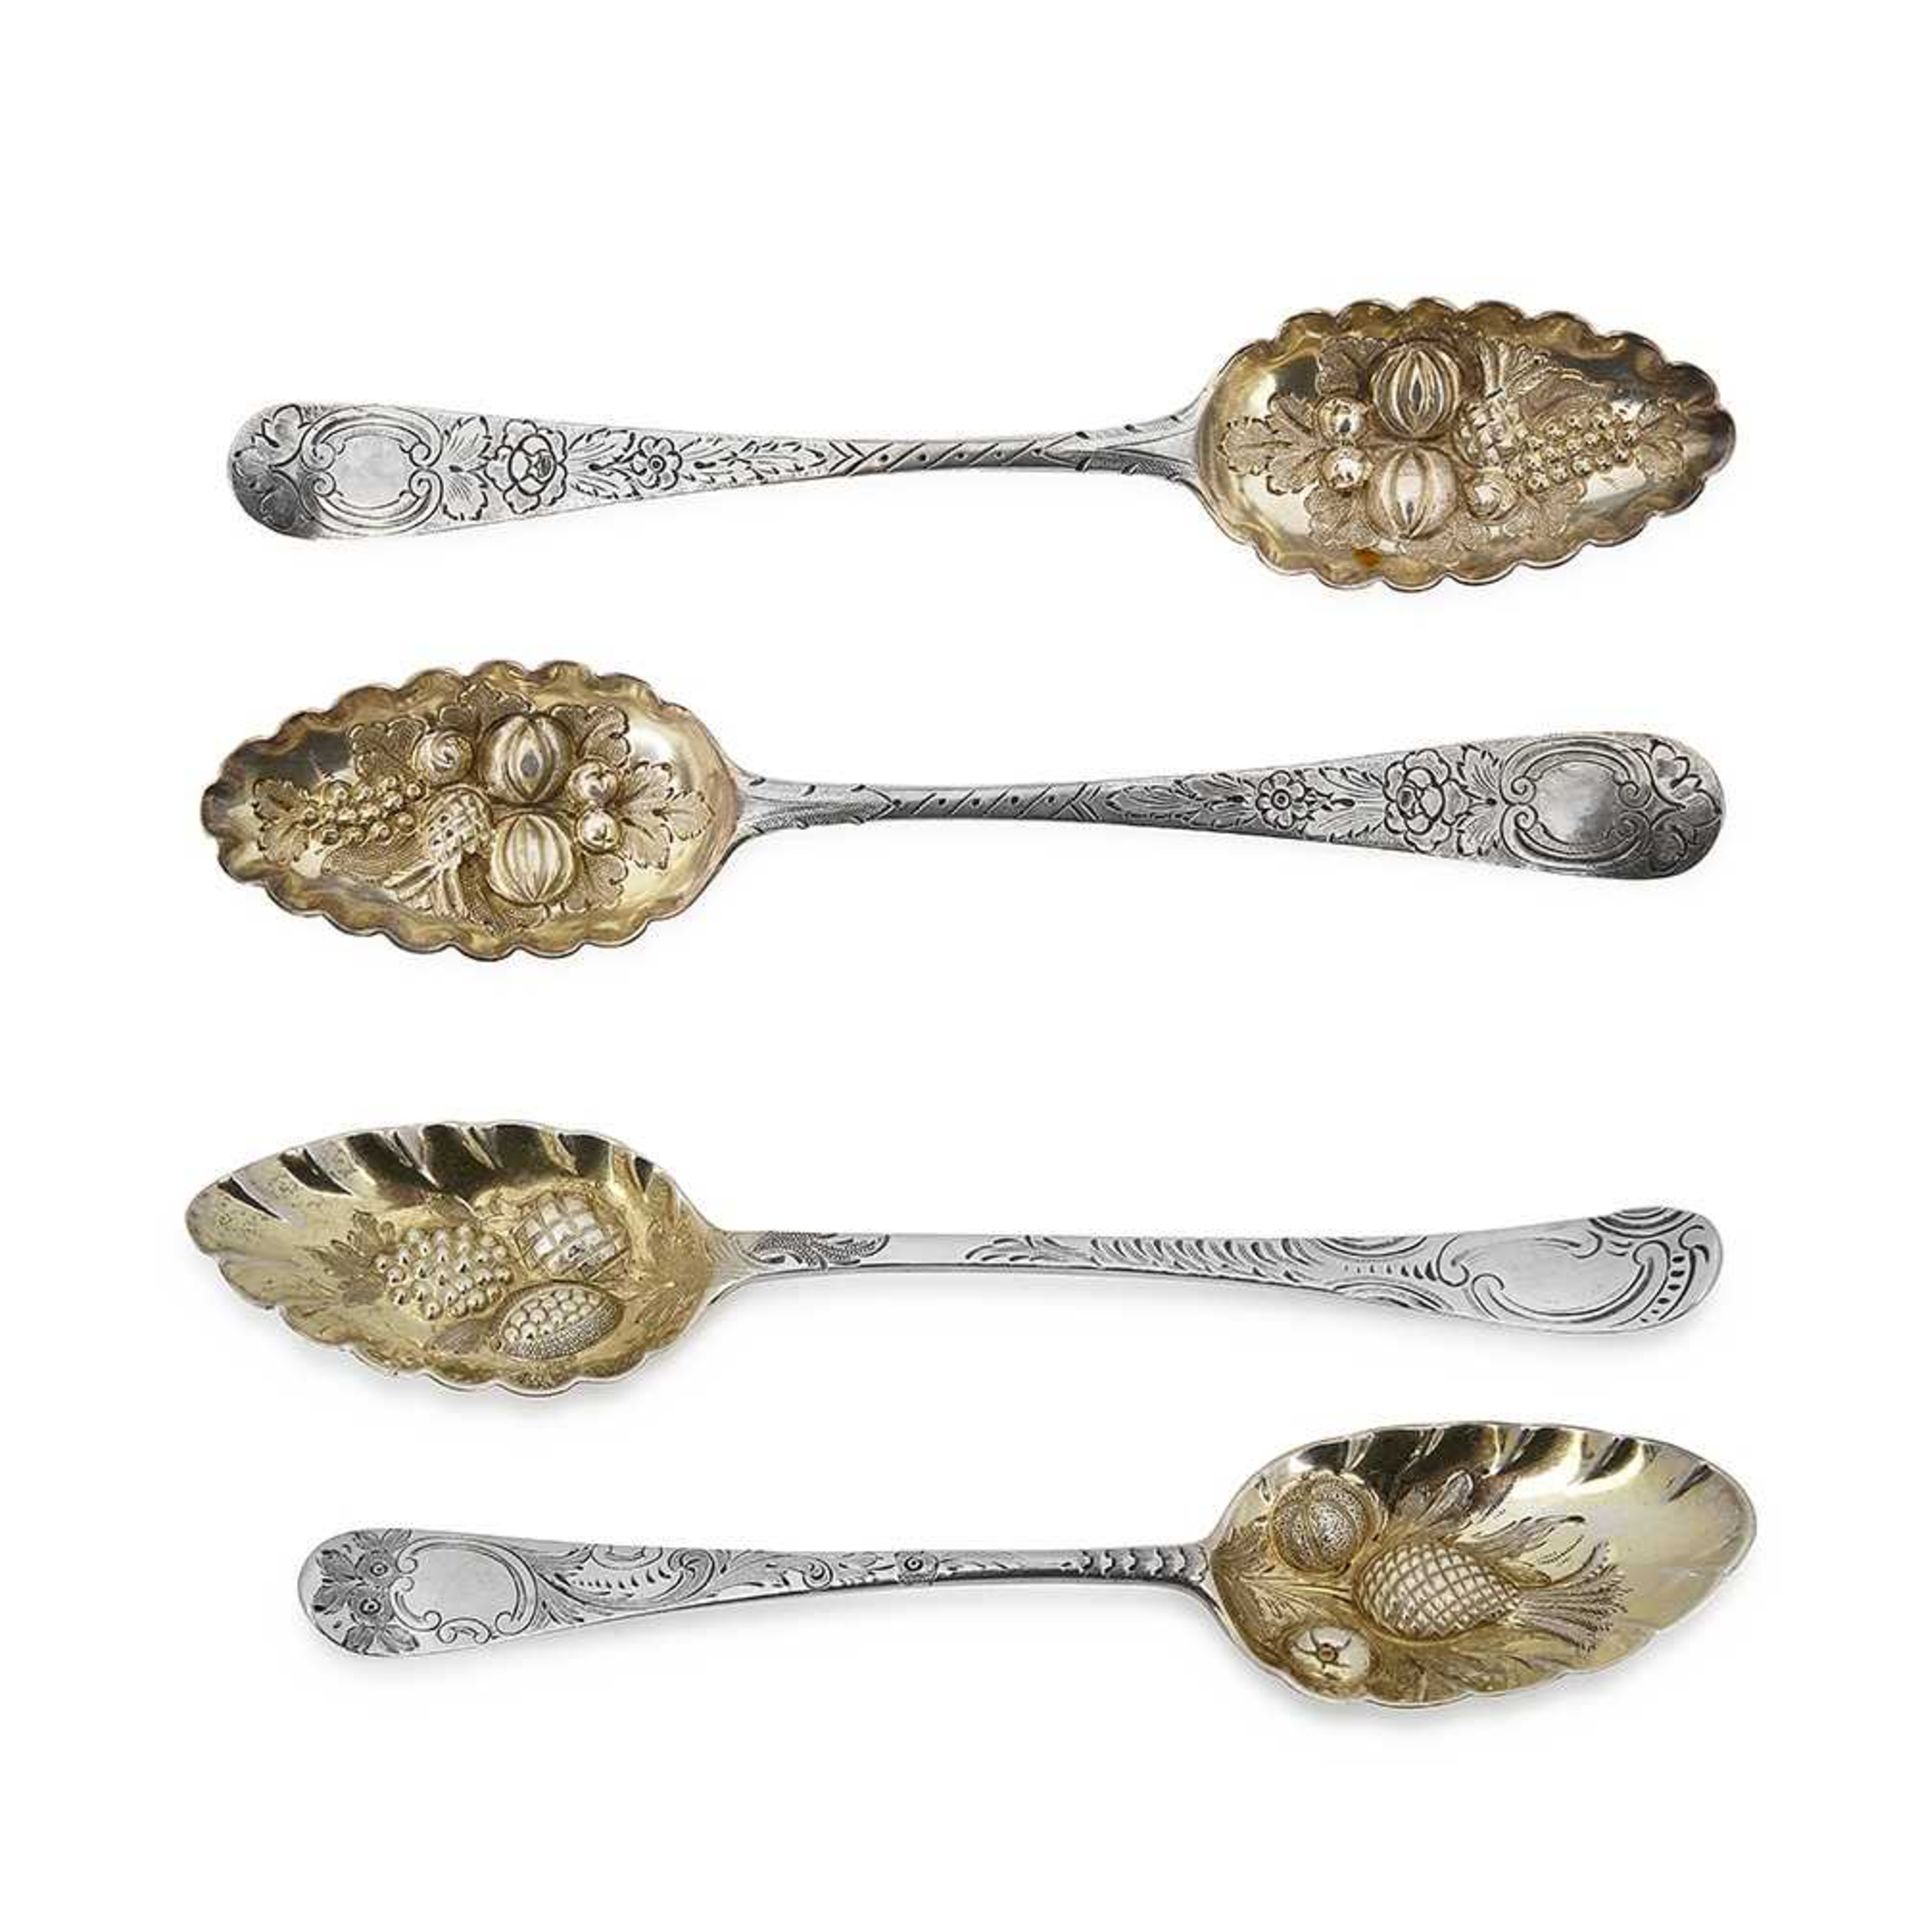 FOUR GEORGIAN SILVER AND SILVER GILT BERRY SPOONS - Image 2 of 4